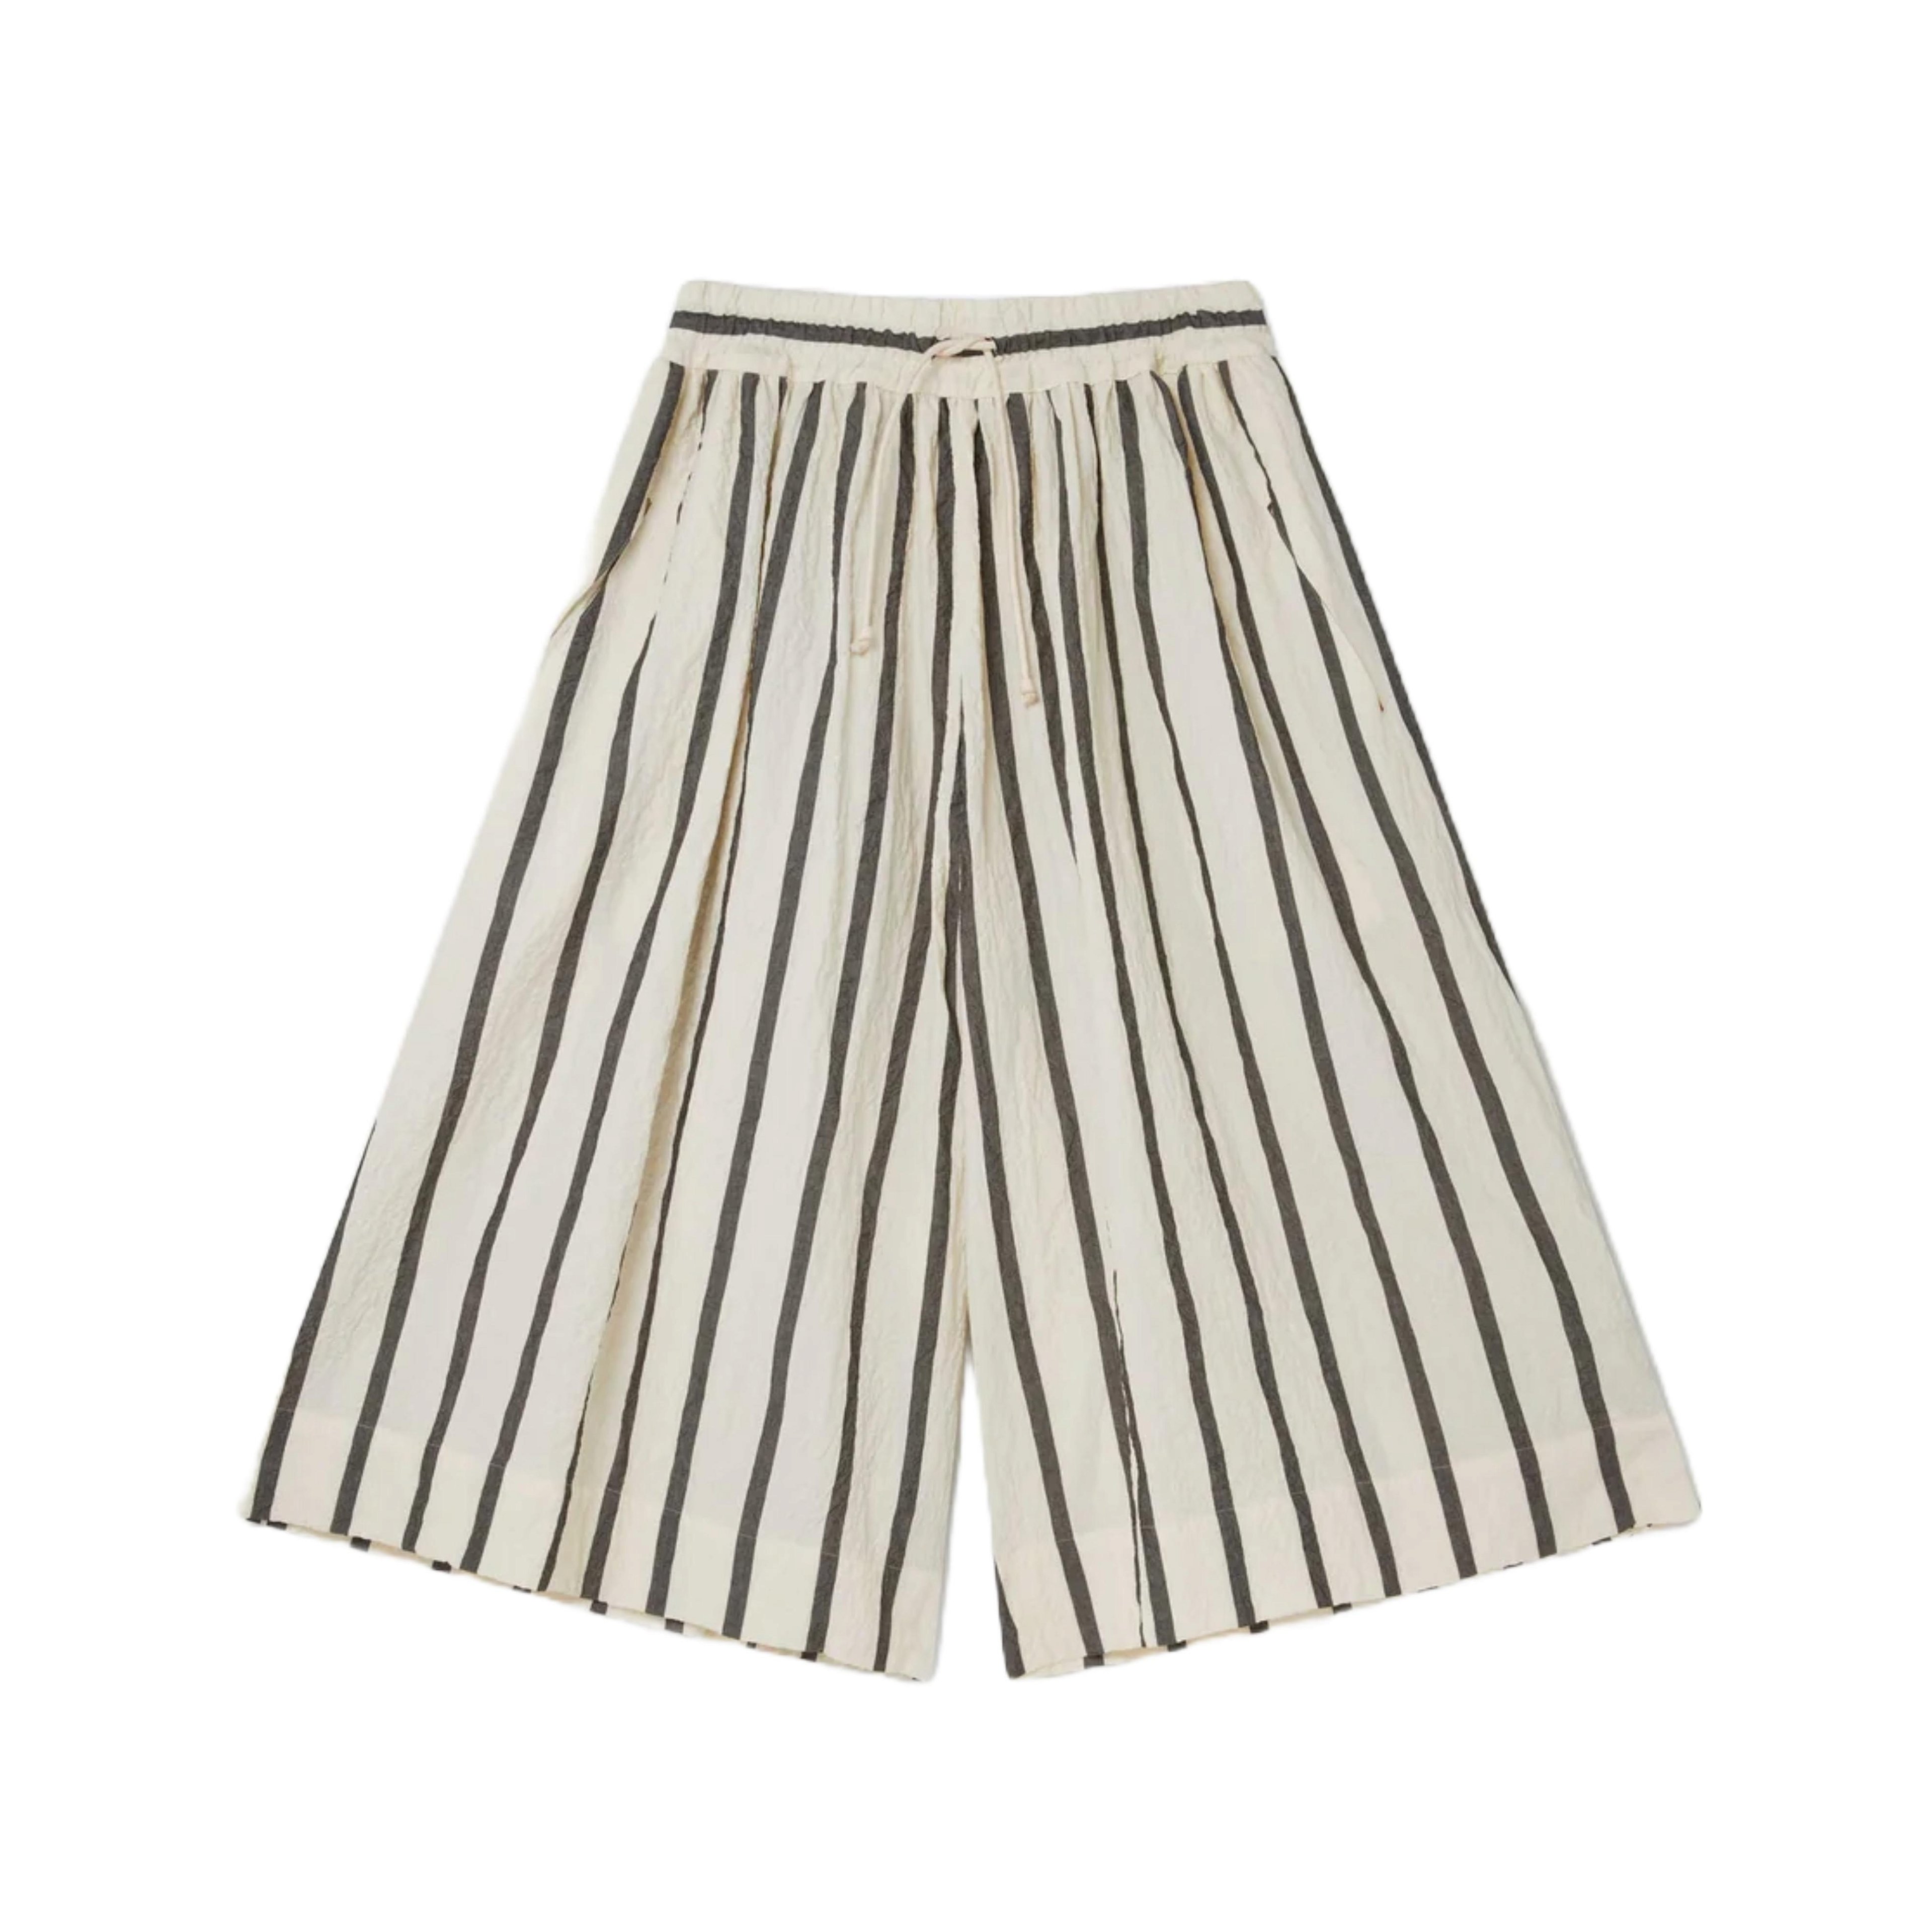 TOOGOOD - Women's The Acrobat Culotte - (Stripes) by TOOGOOD